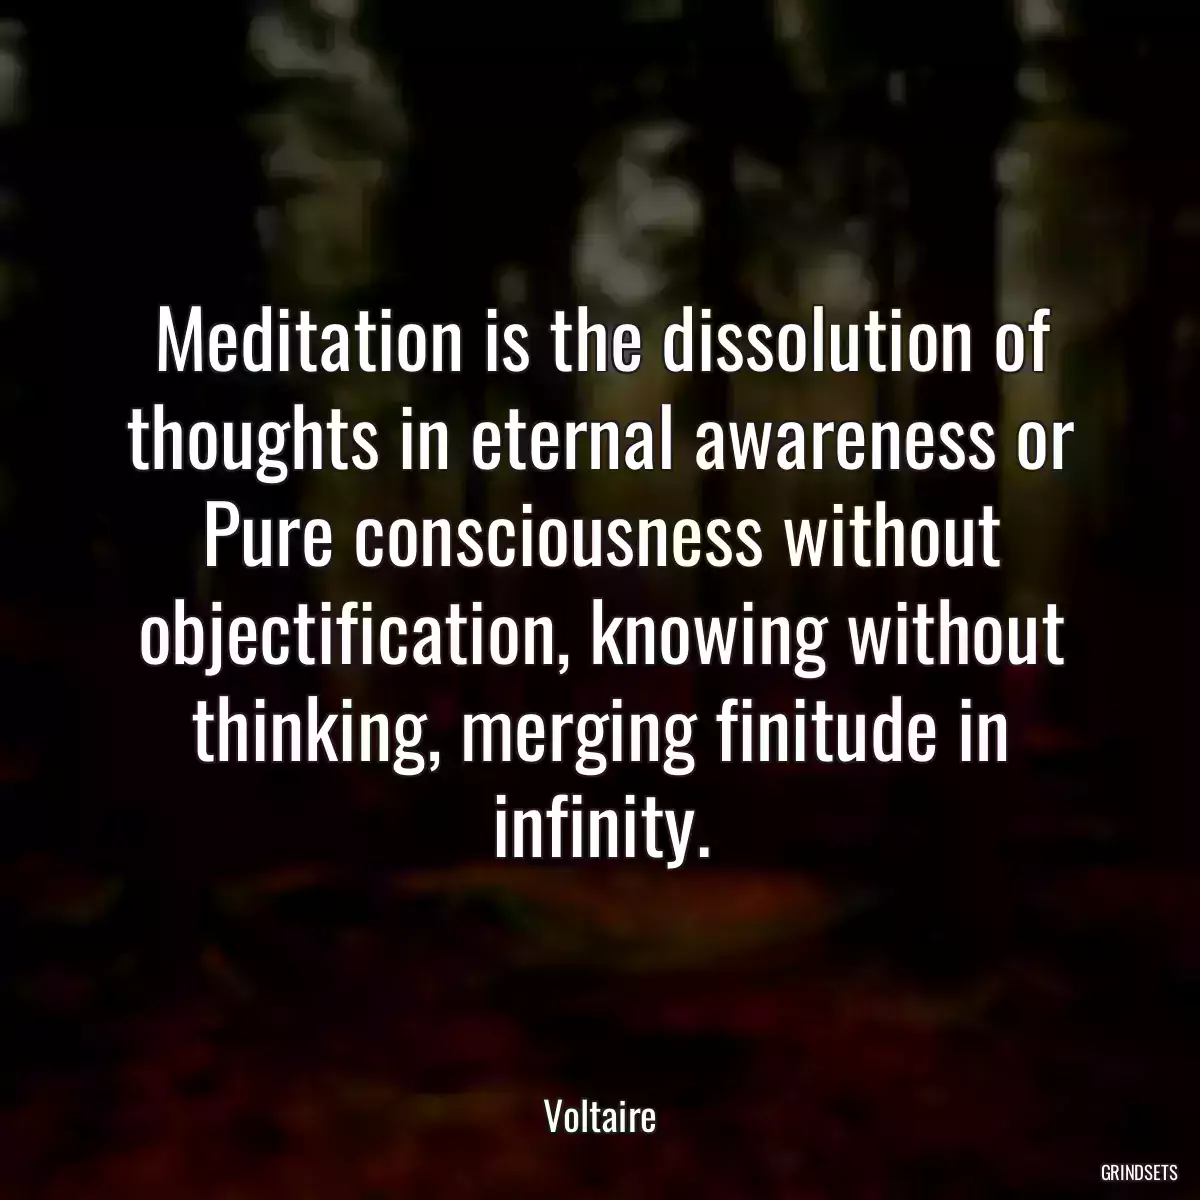 Meditation is the dissolution of thoughts in eternal awareness or Pure consciousness without objectification, knowing without thinking, merging finitude in infinity.